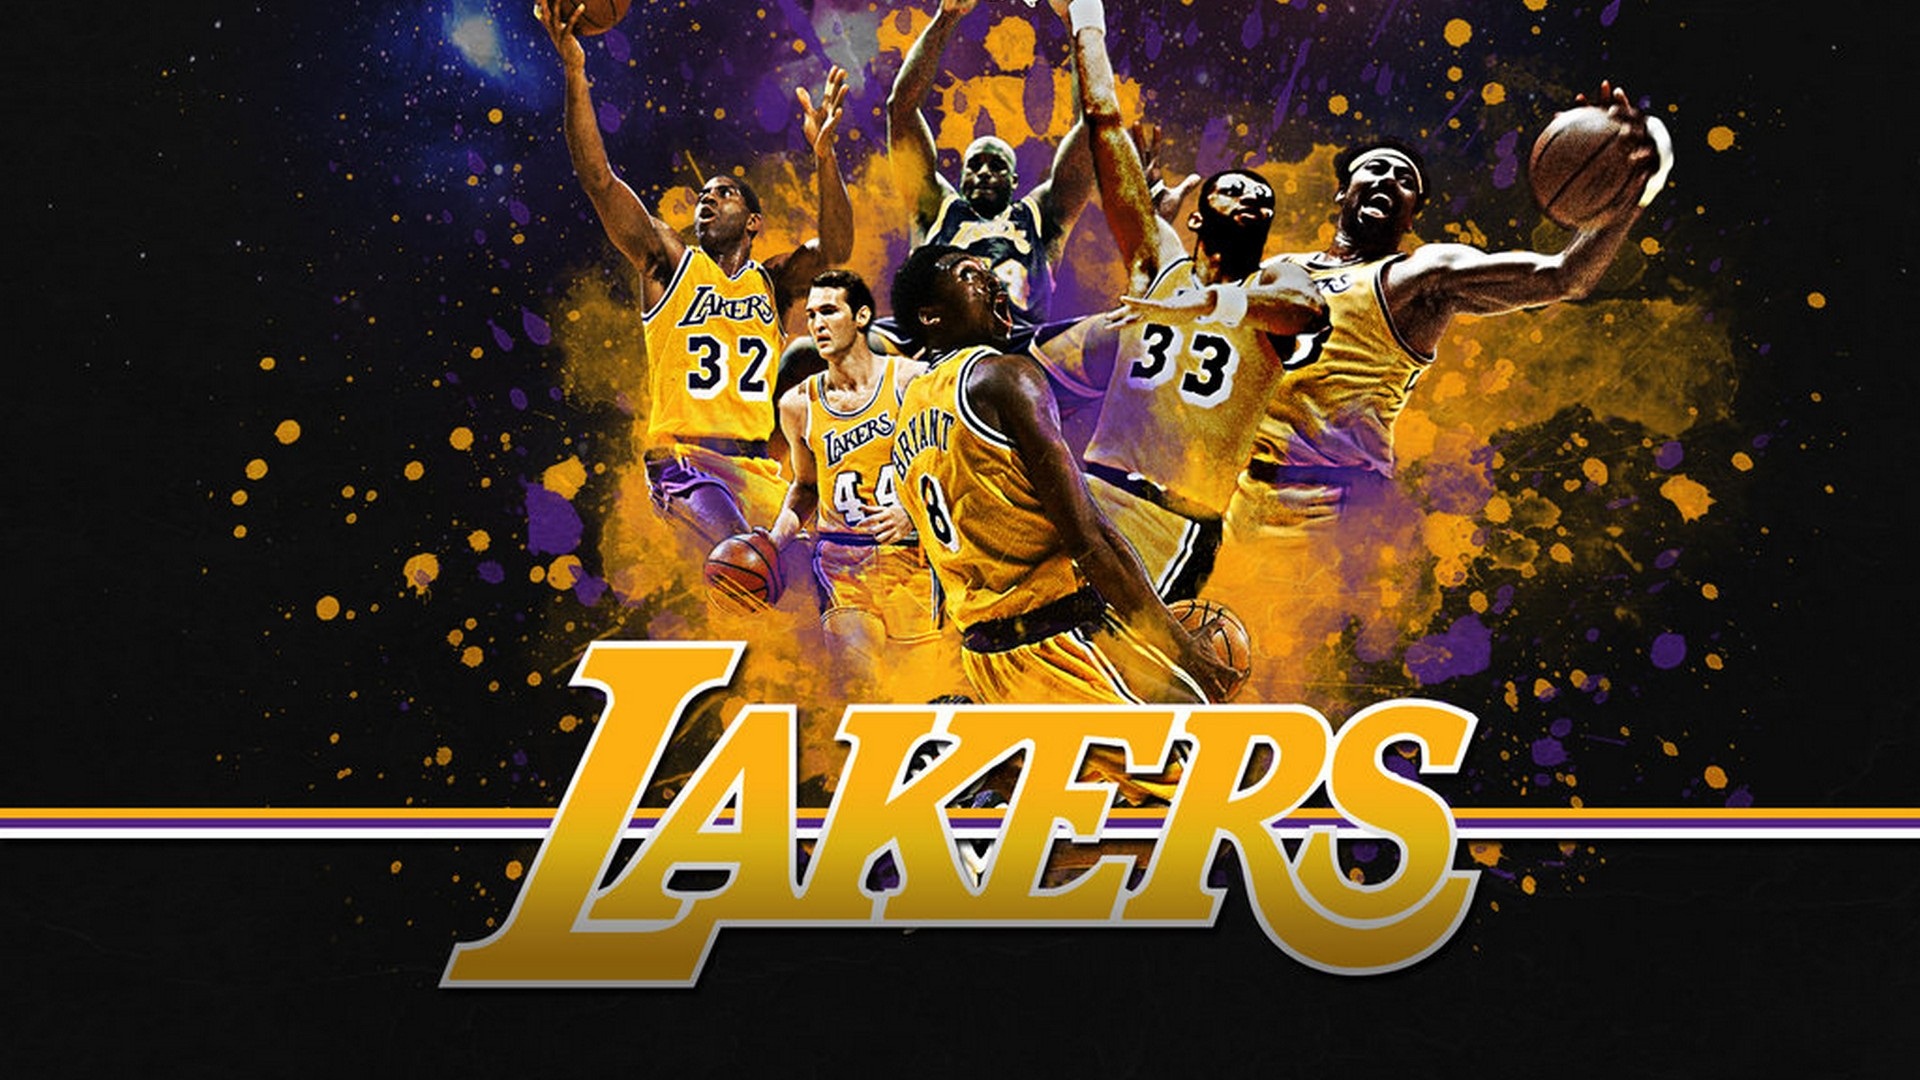 HD Backgrounds Los Angeles Lakers with image dimensions 1920x1080 pixel. You can make this wallpaper for your Desktop Computer Backgrounds, Windows or Mac Screensavers, iPhone Lock screen, Tablet or Android and another Mobile Phone device